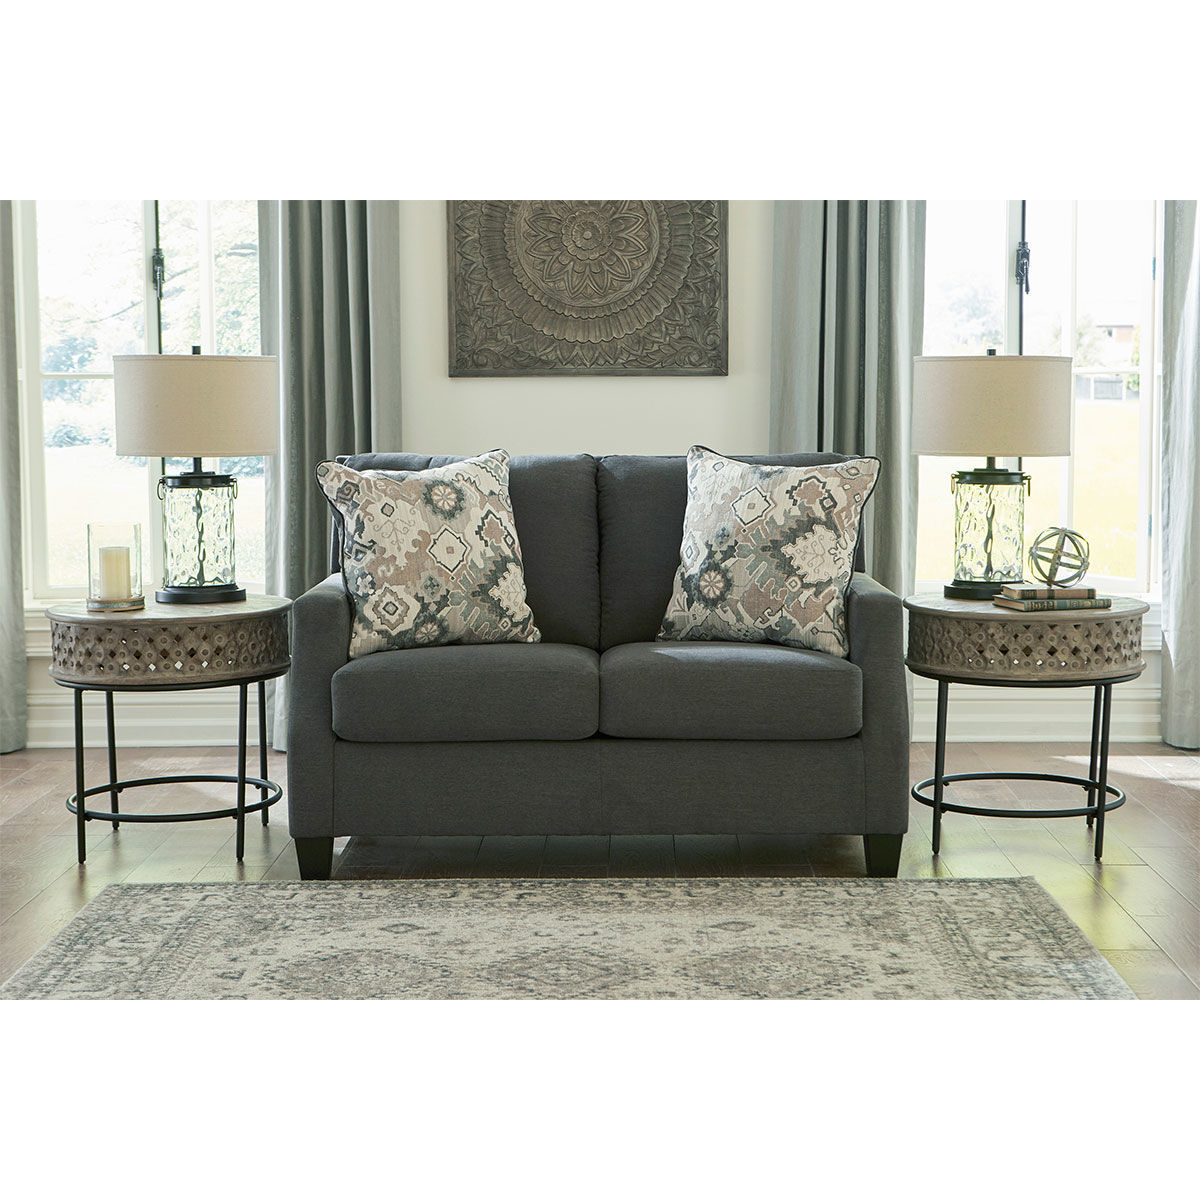 Picture of CHELSEA LOVESEAT